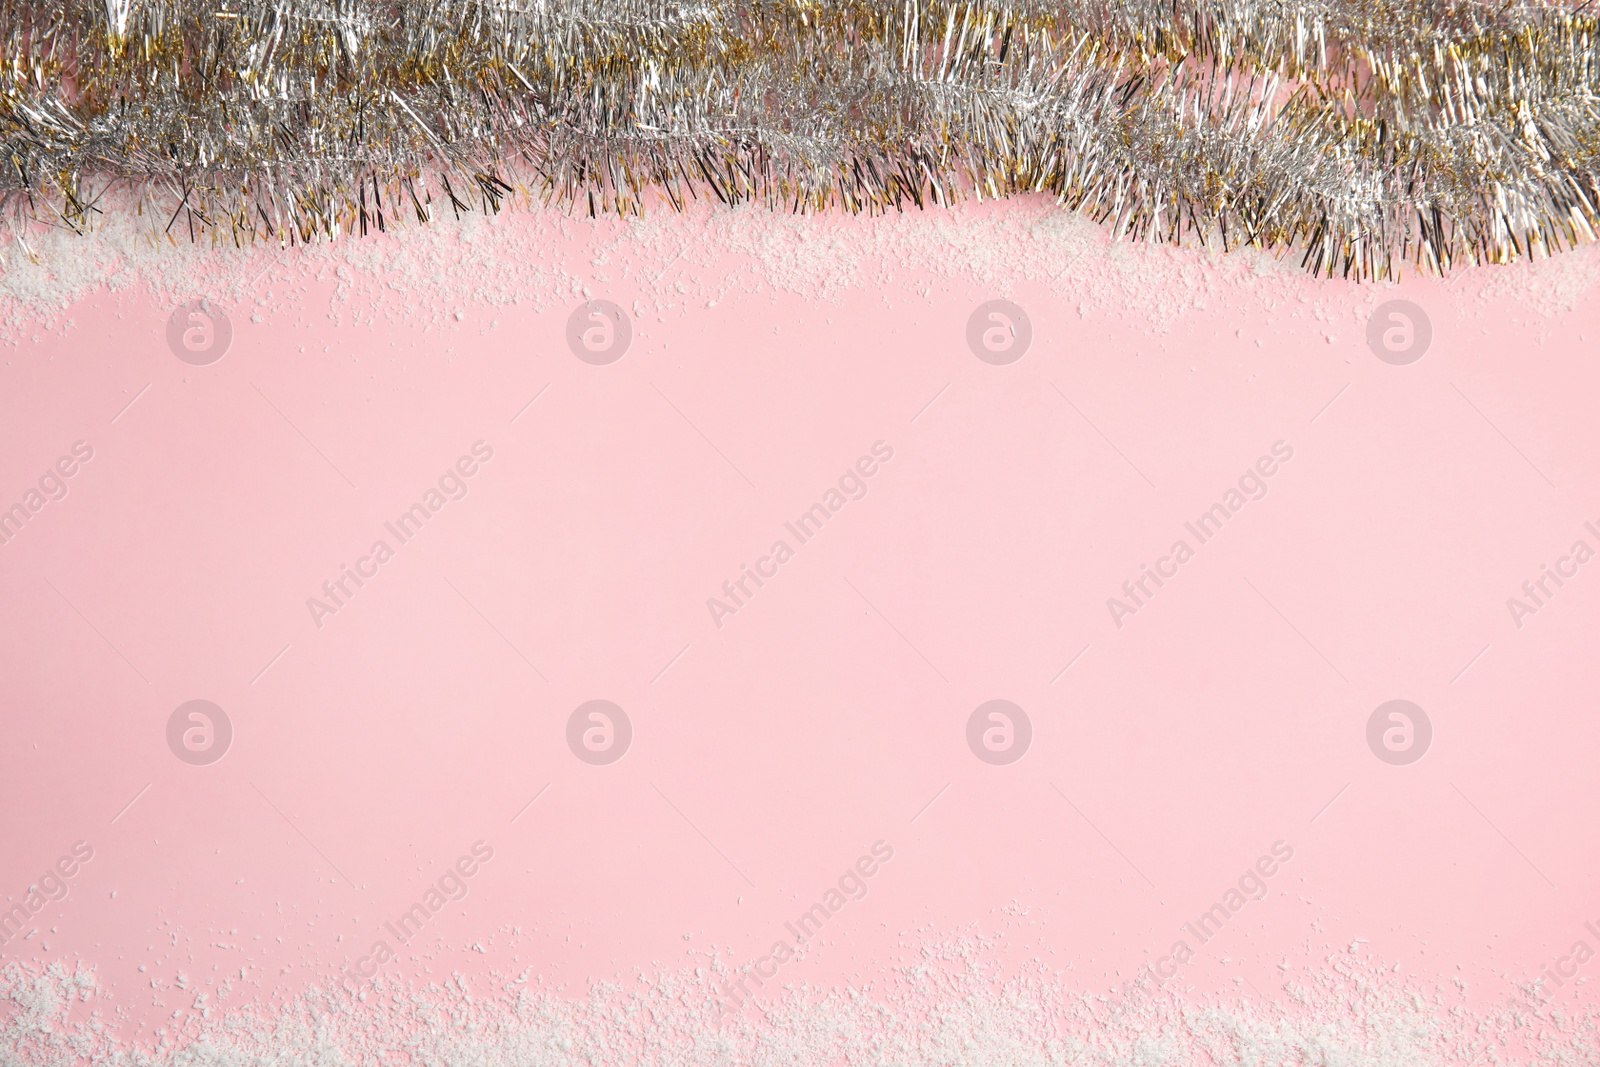 Photo of Shiny tinsel and snow on pink background, top view. Space for text